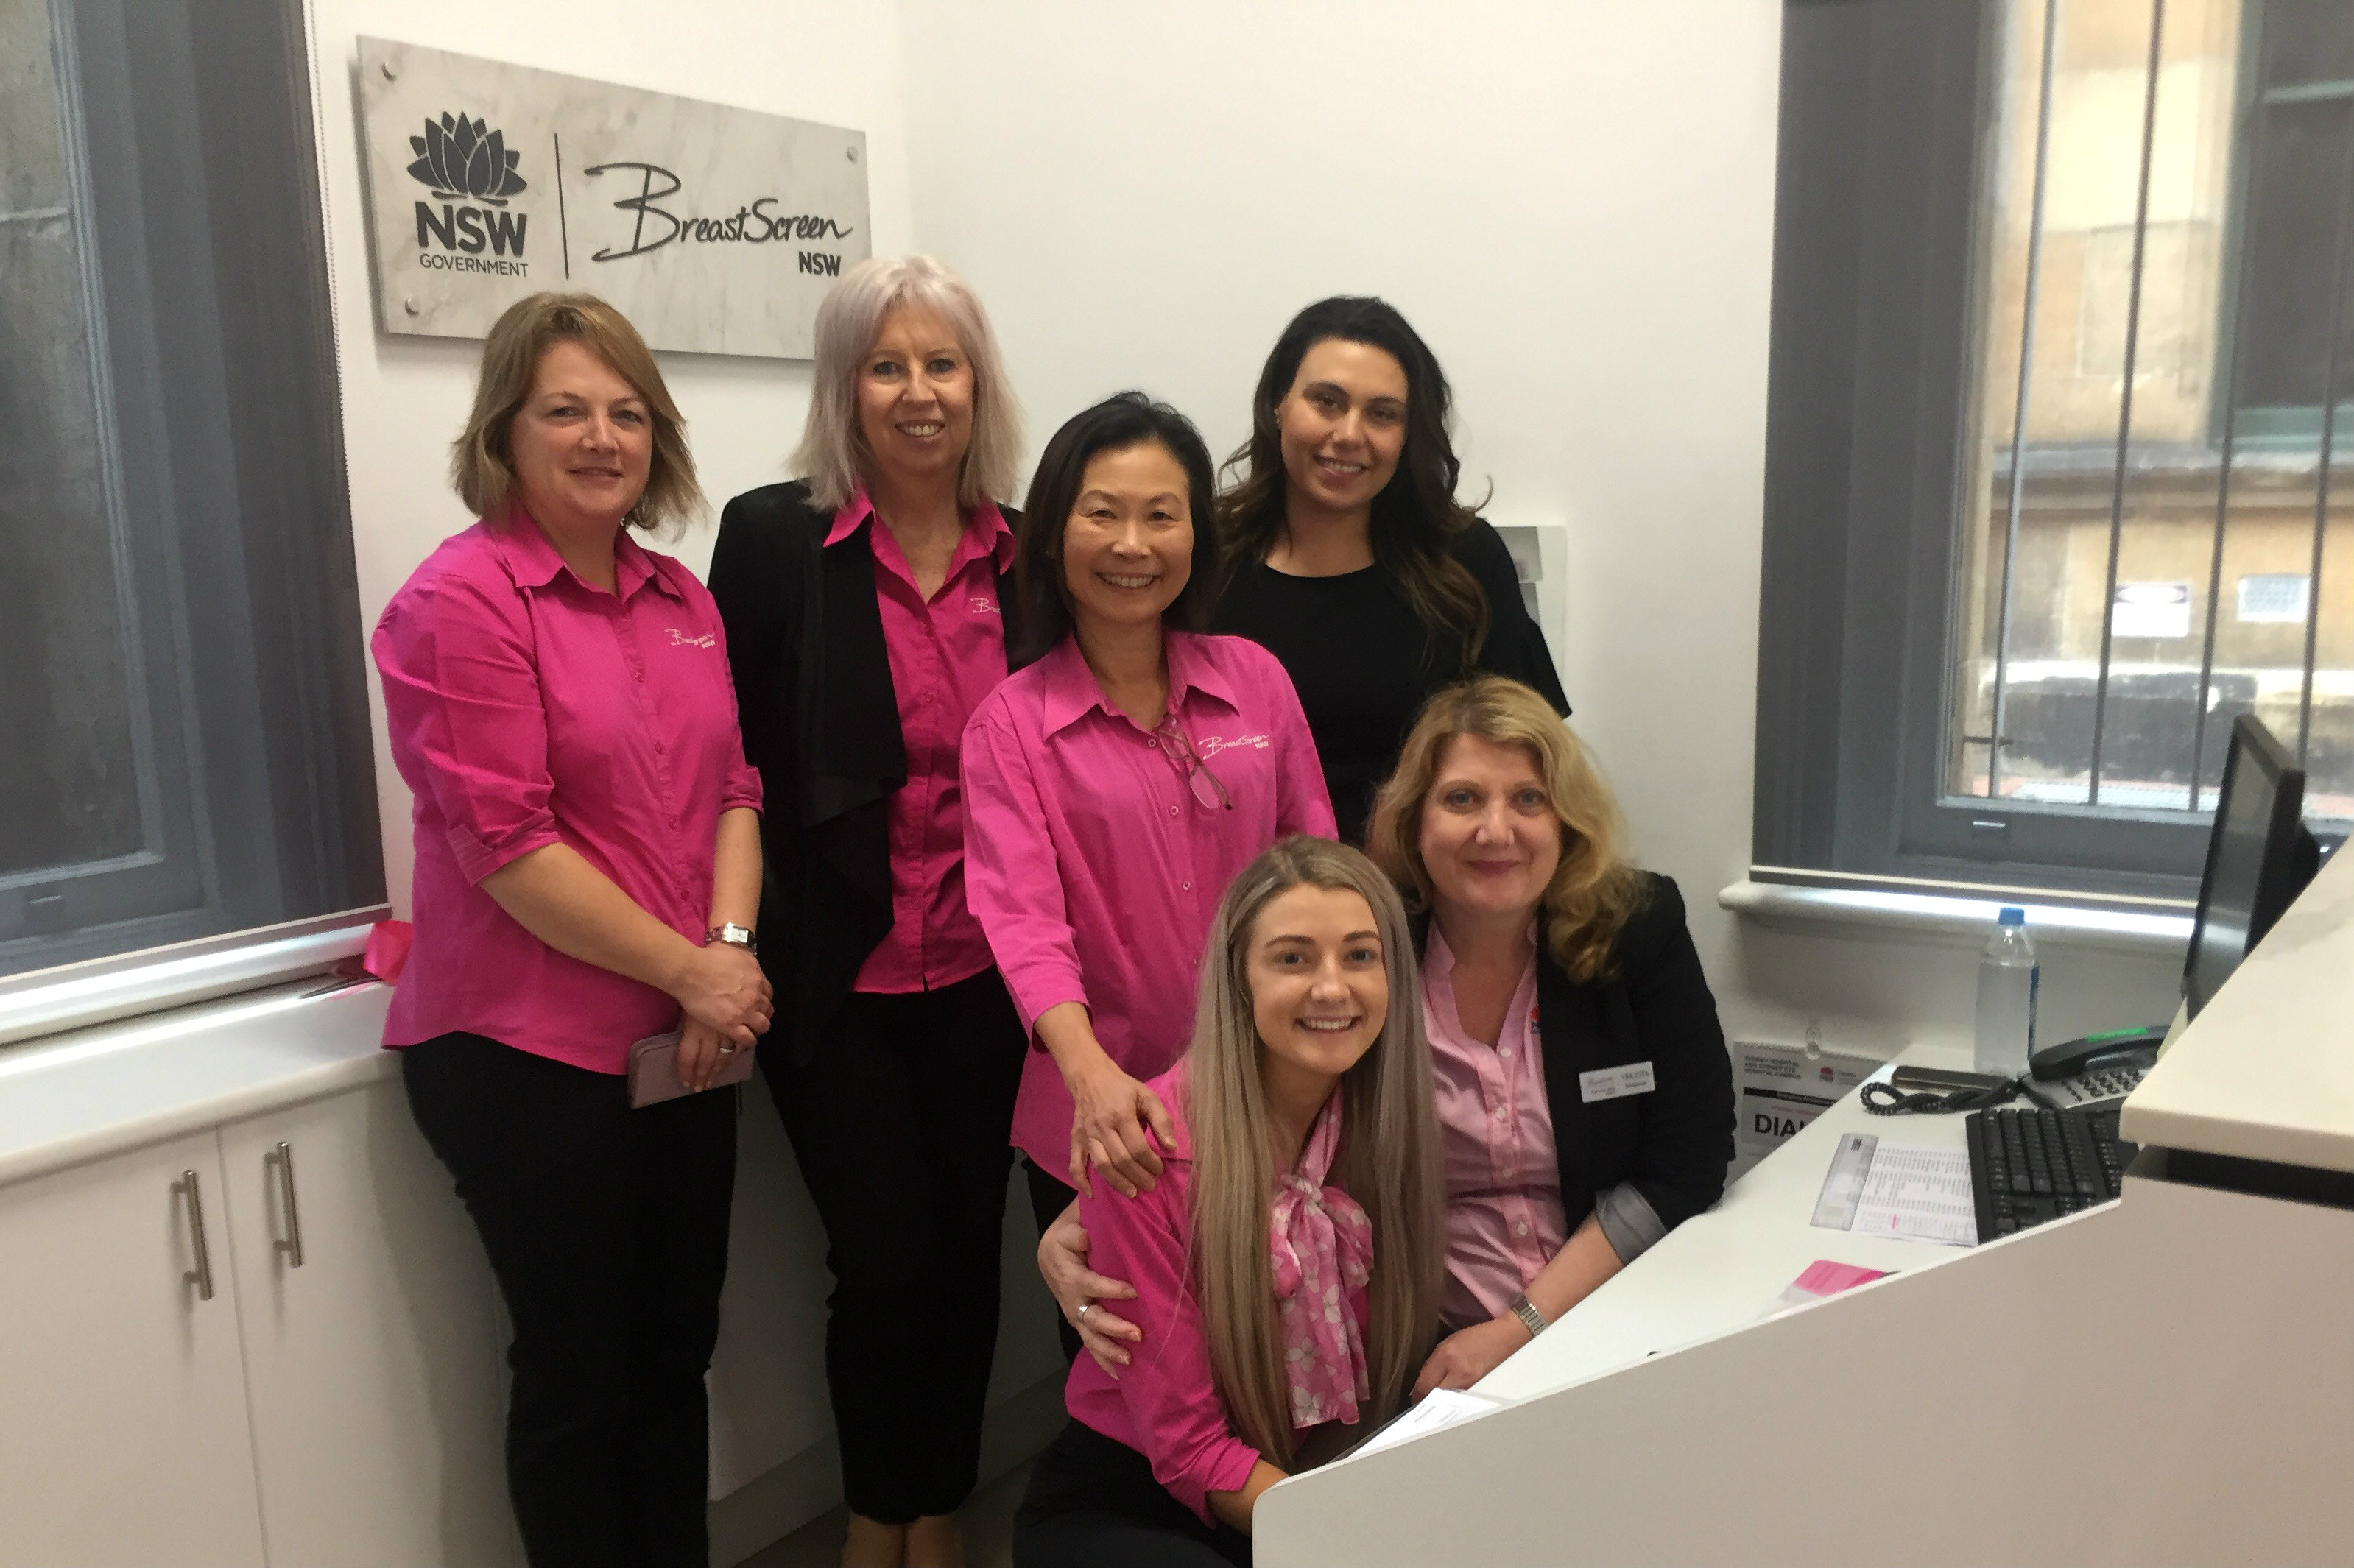 Staff in pink t-shirts at reception desk